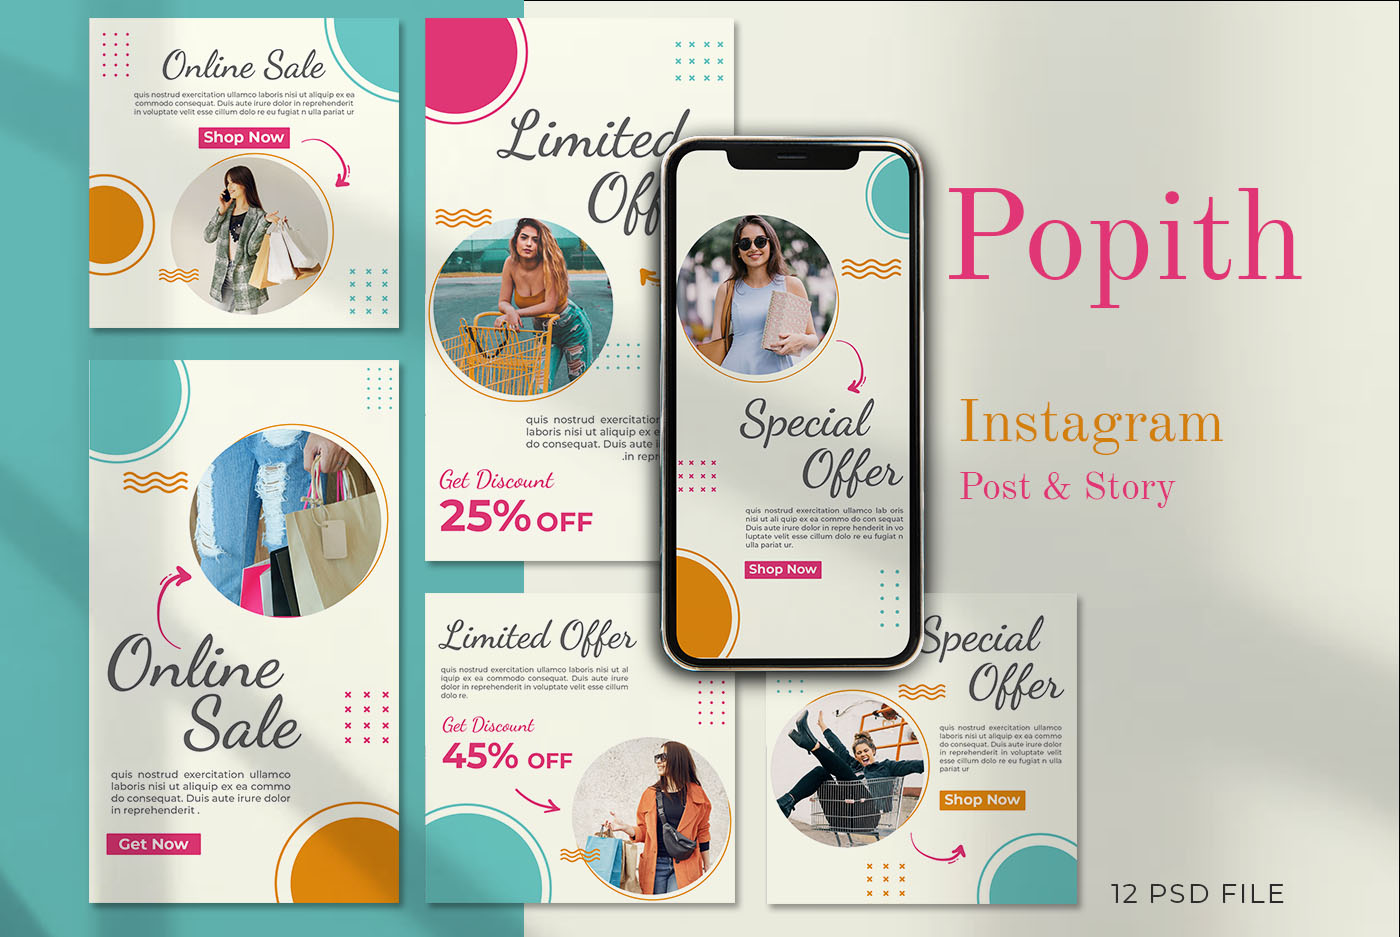 POPITH- Social Media Post and Story Template for Instagram